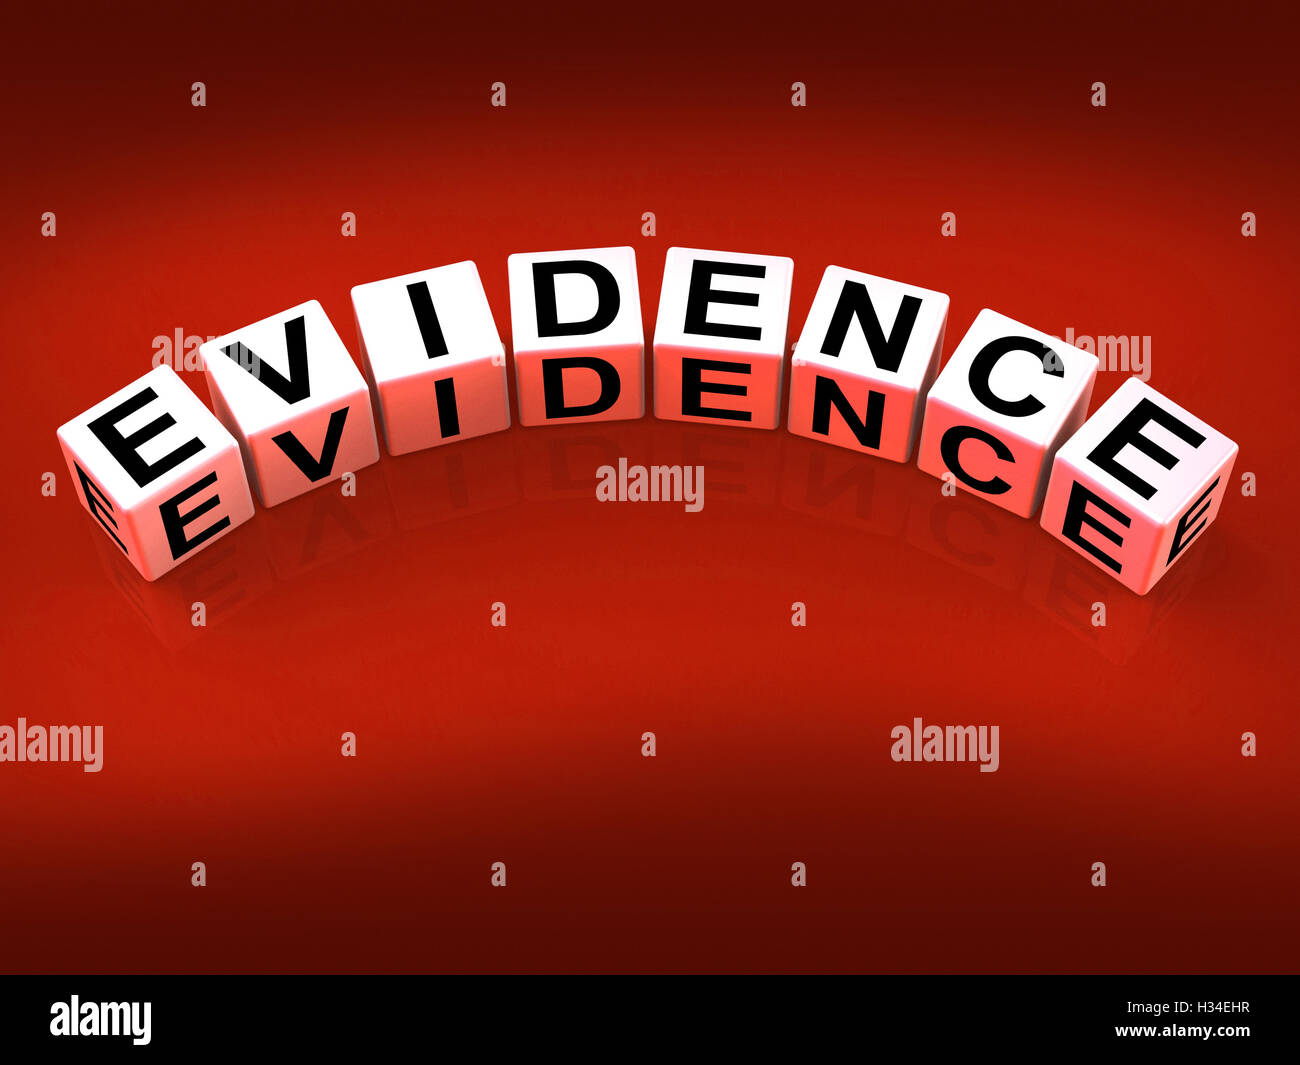 Evidence Blocks Represent Evidential Substantiation and Proof Stock Photo